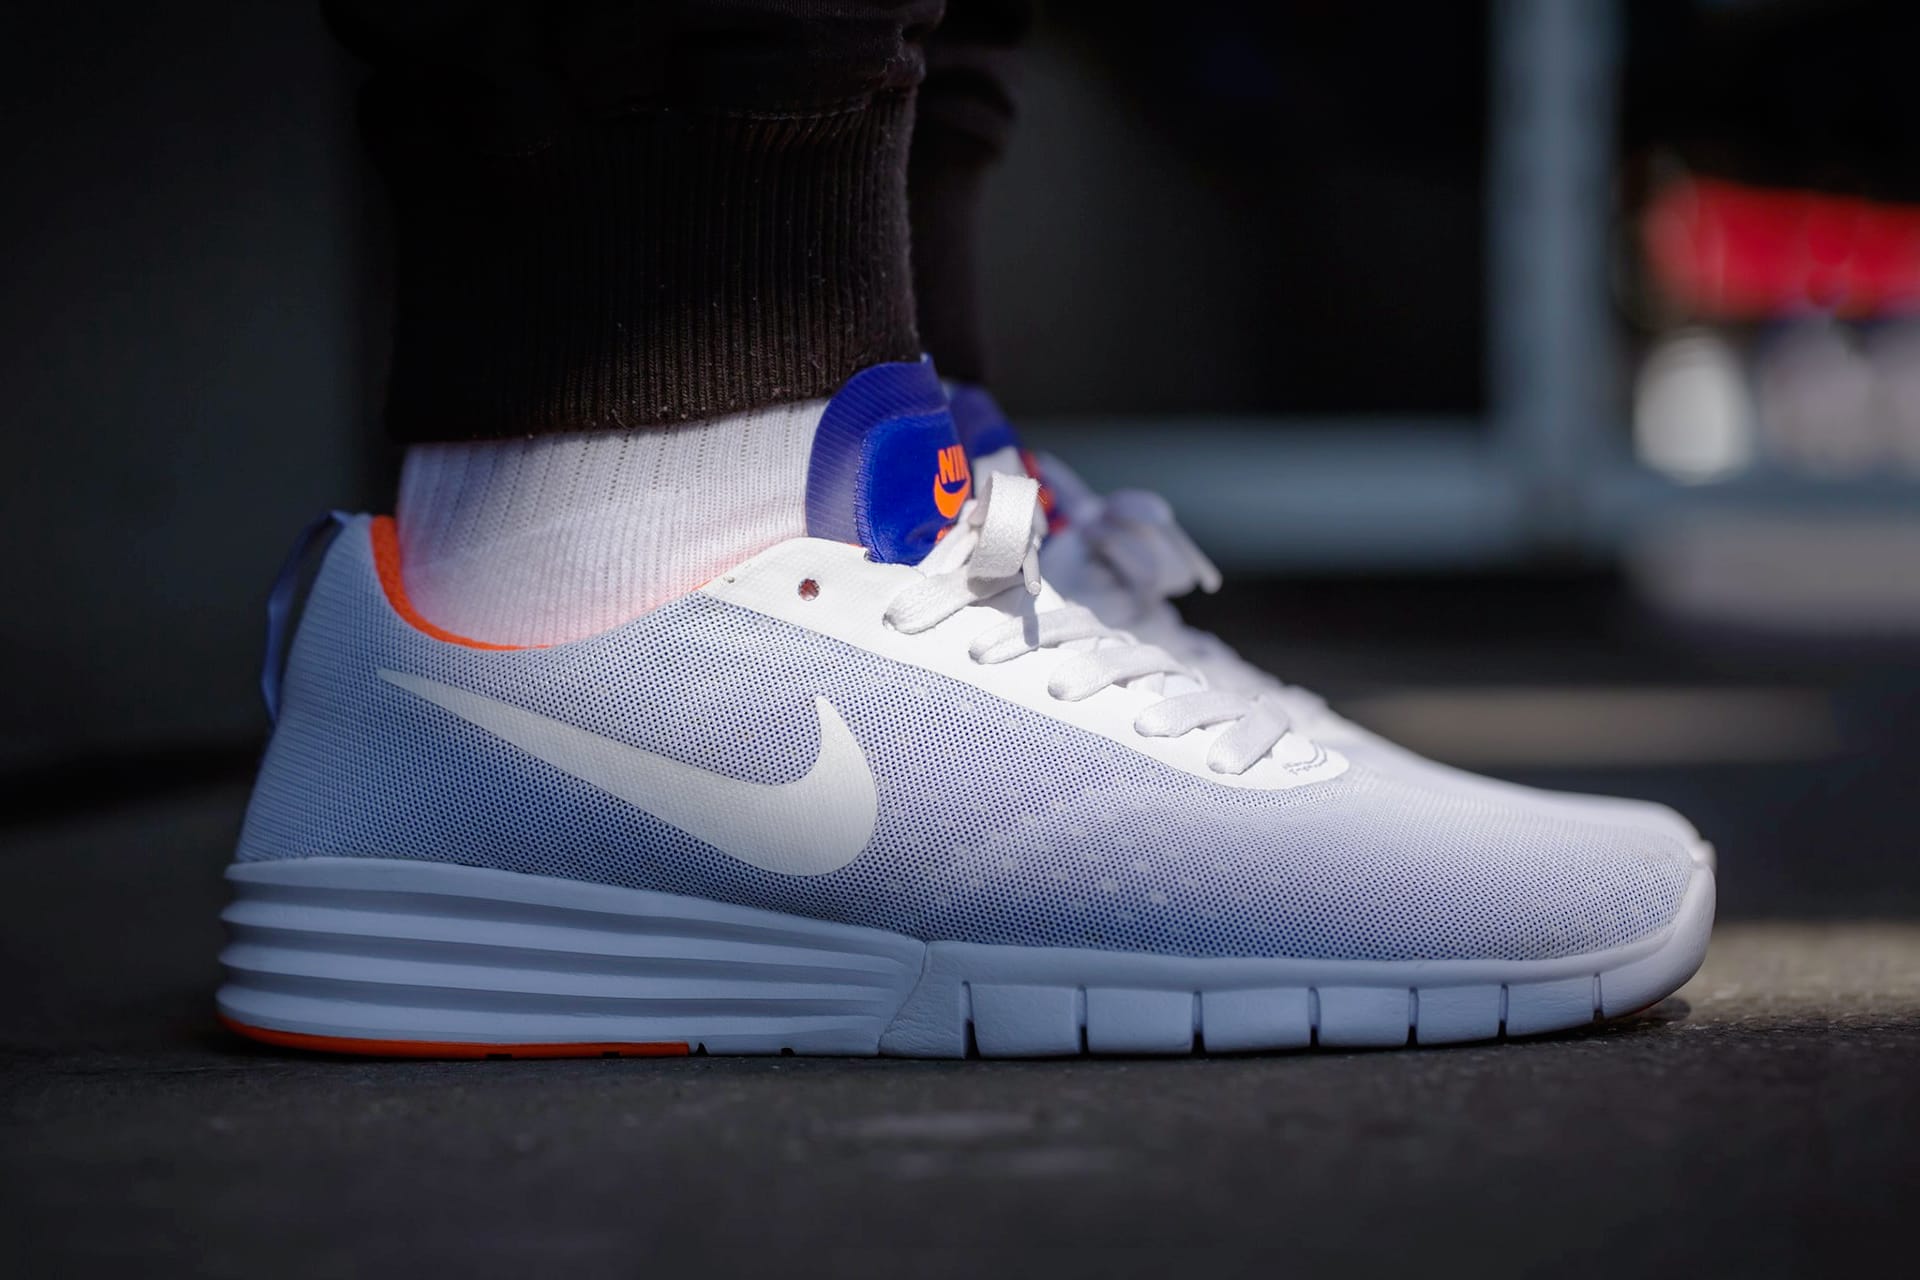 Nike SB Lunar Paul Rodriguez 9 R/R Combines Comfort With Eye-Popping Bursts  of Color | HYPEBEAST